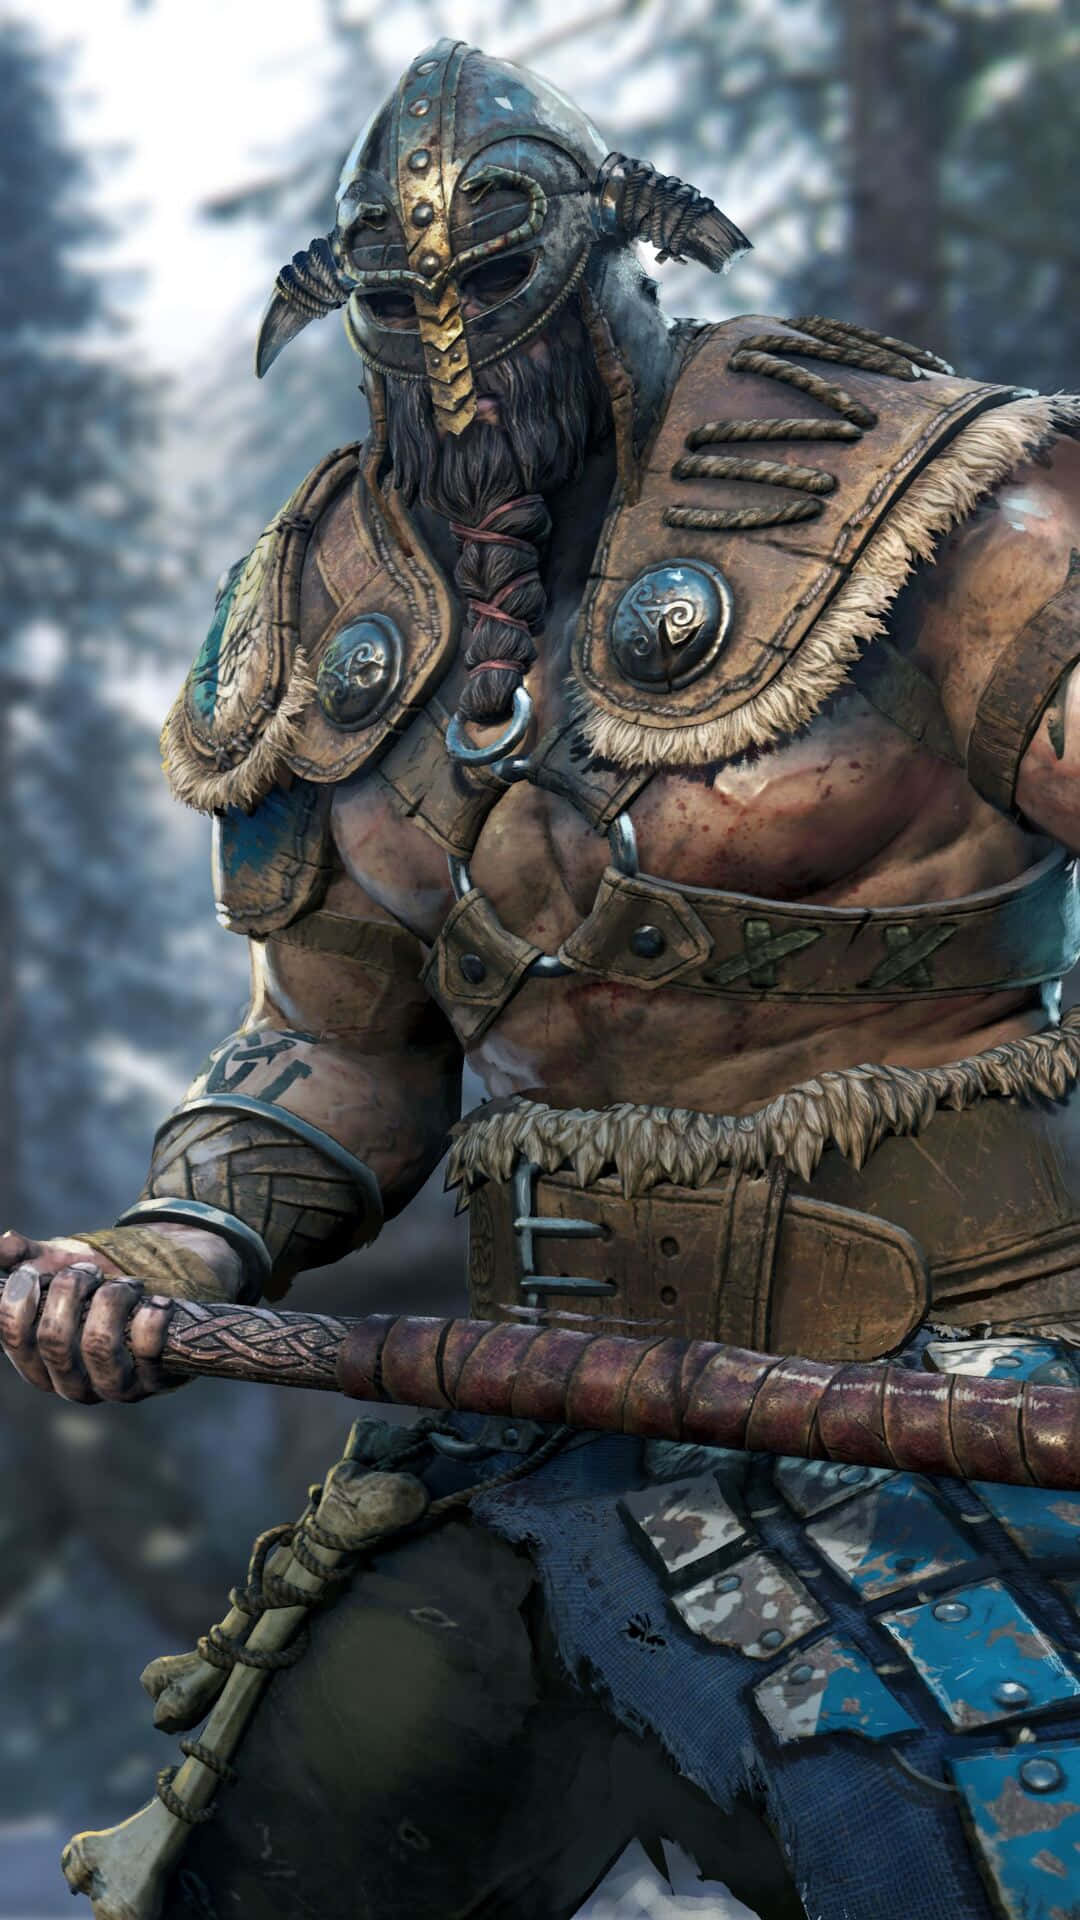 Raider Android For Honor Background